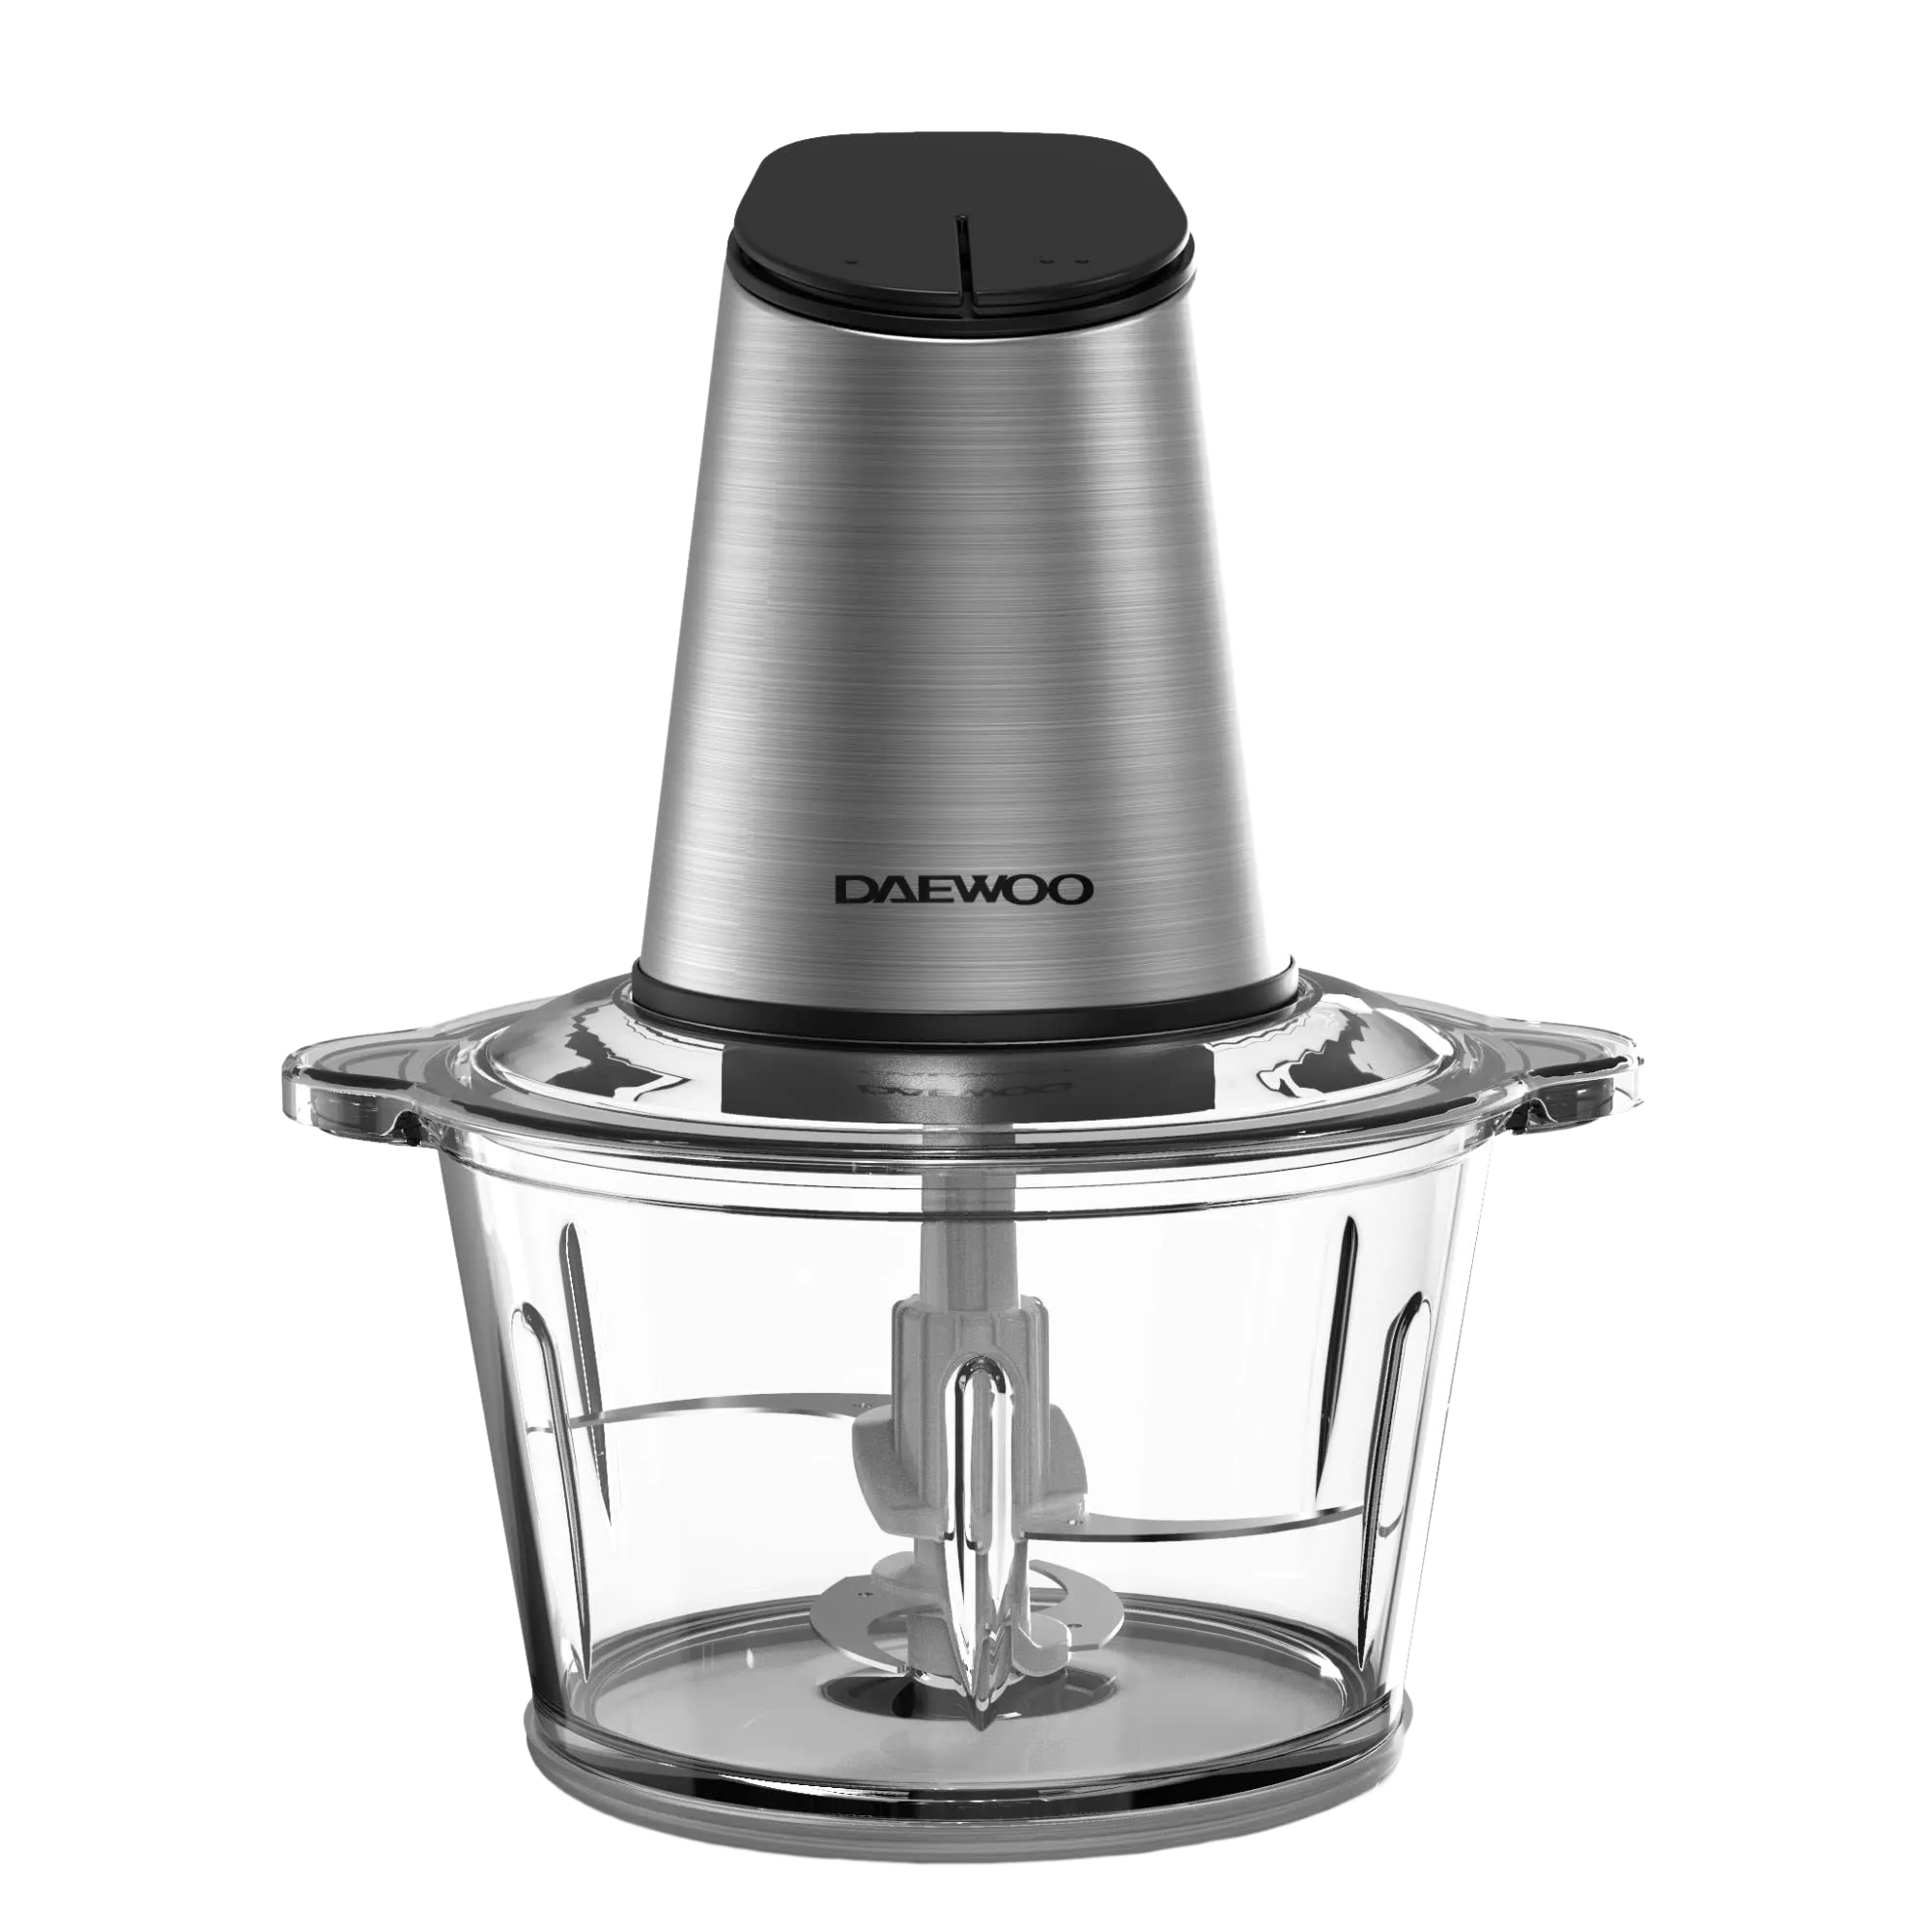 Daewoo 500W 1.8L Stainless Steel Food Chopper with Glass Bowl, Quad Blade, Mincer & Grinder Function Korean Technology DFC2053 Silver - 2 Years Warranty